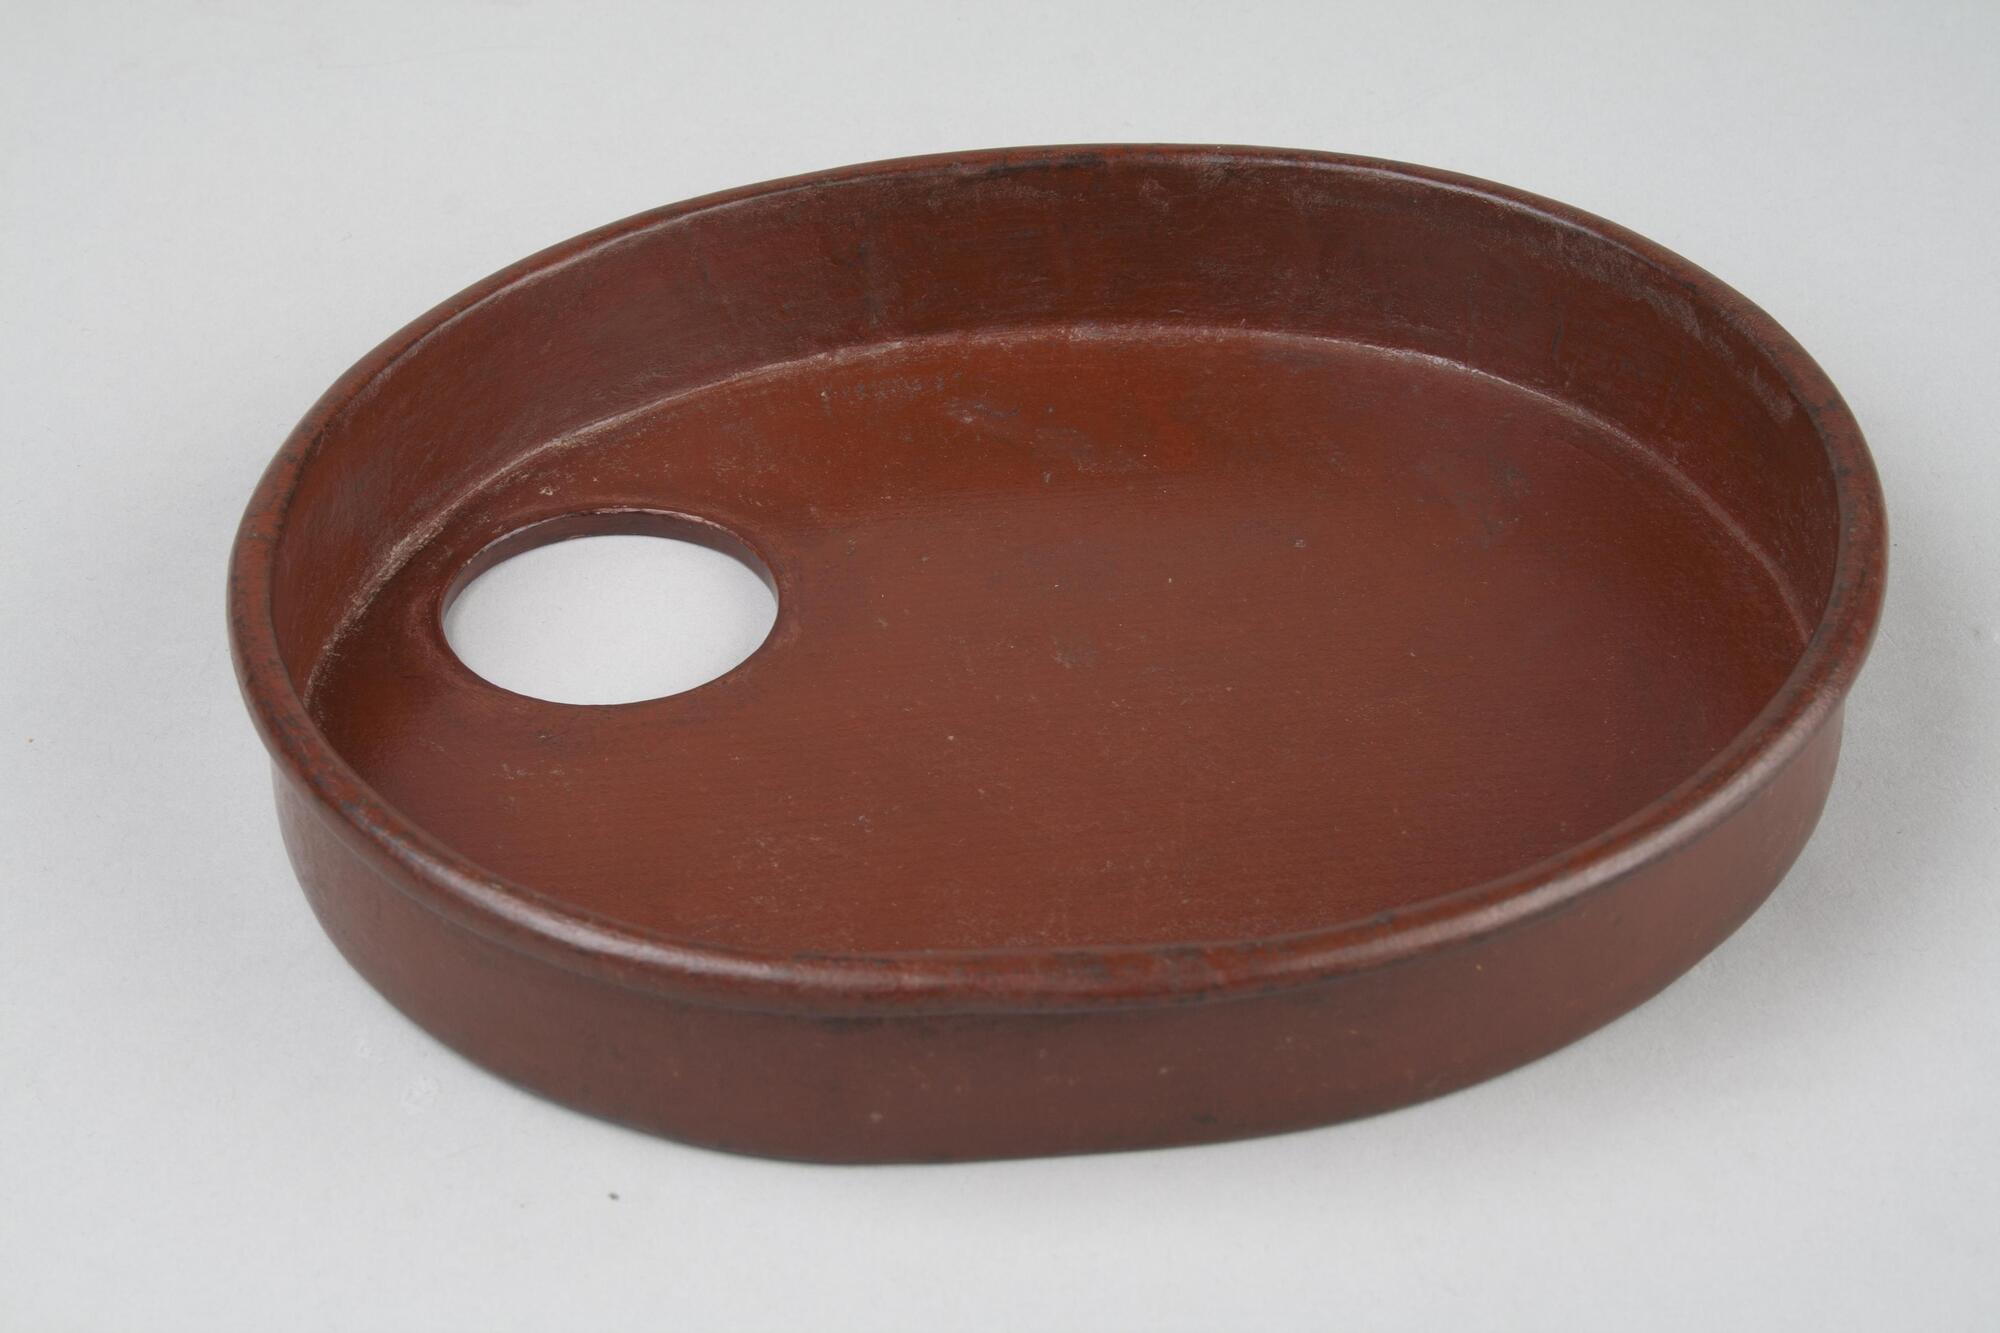 Oval wooden tray with one inch lip and rounded edge. There is a two inch hole to allow room for the whisk. This is a part of a portable tea set.